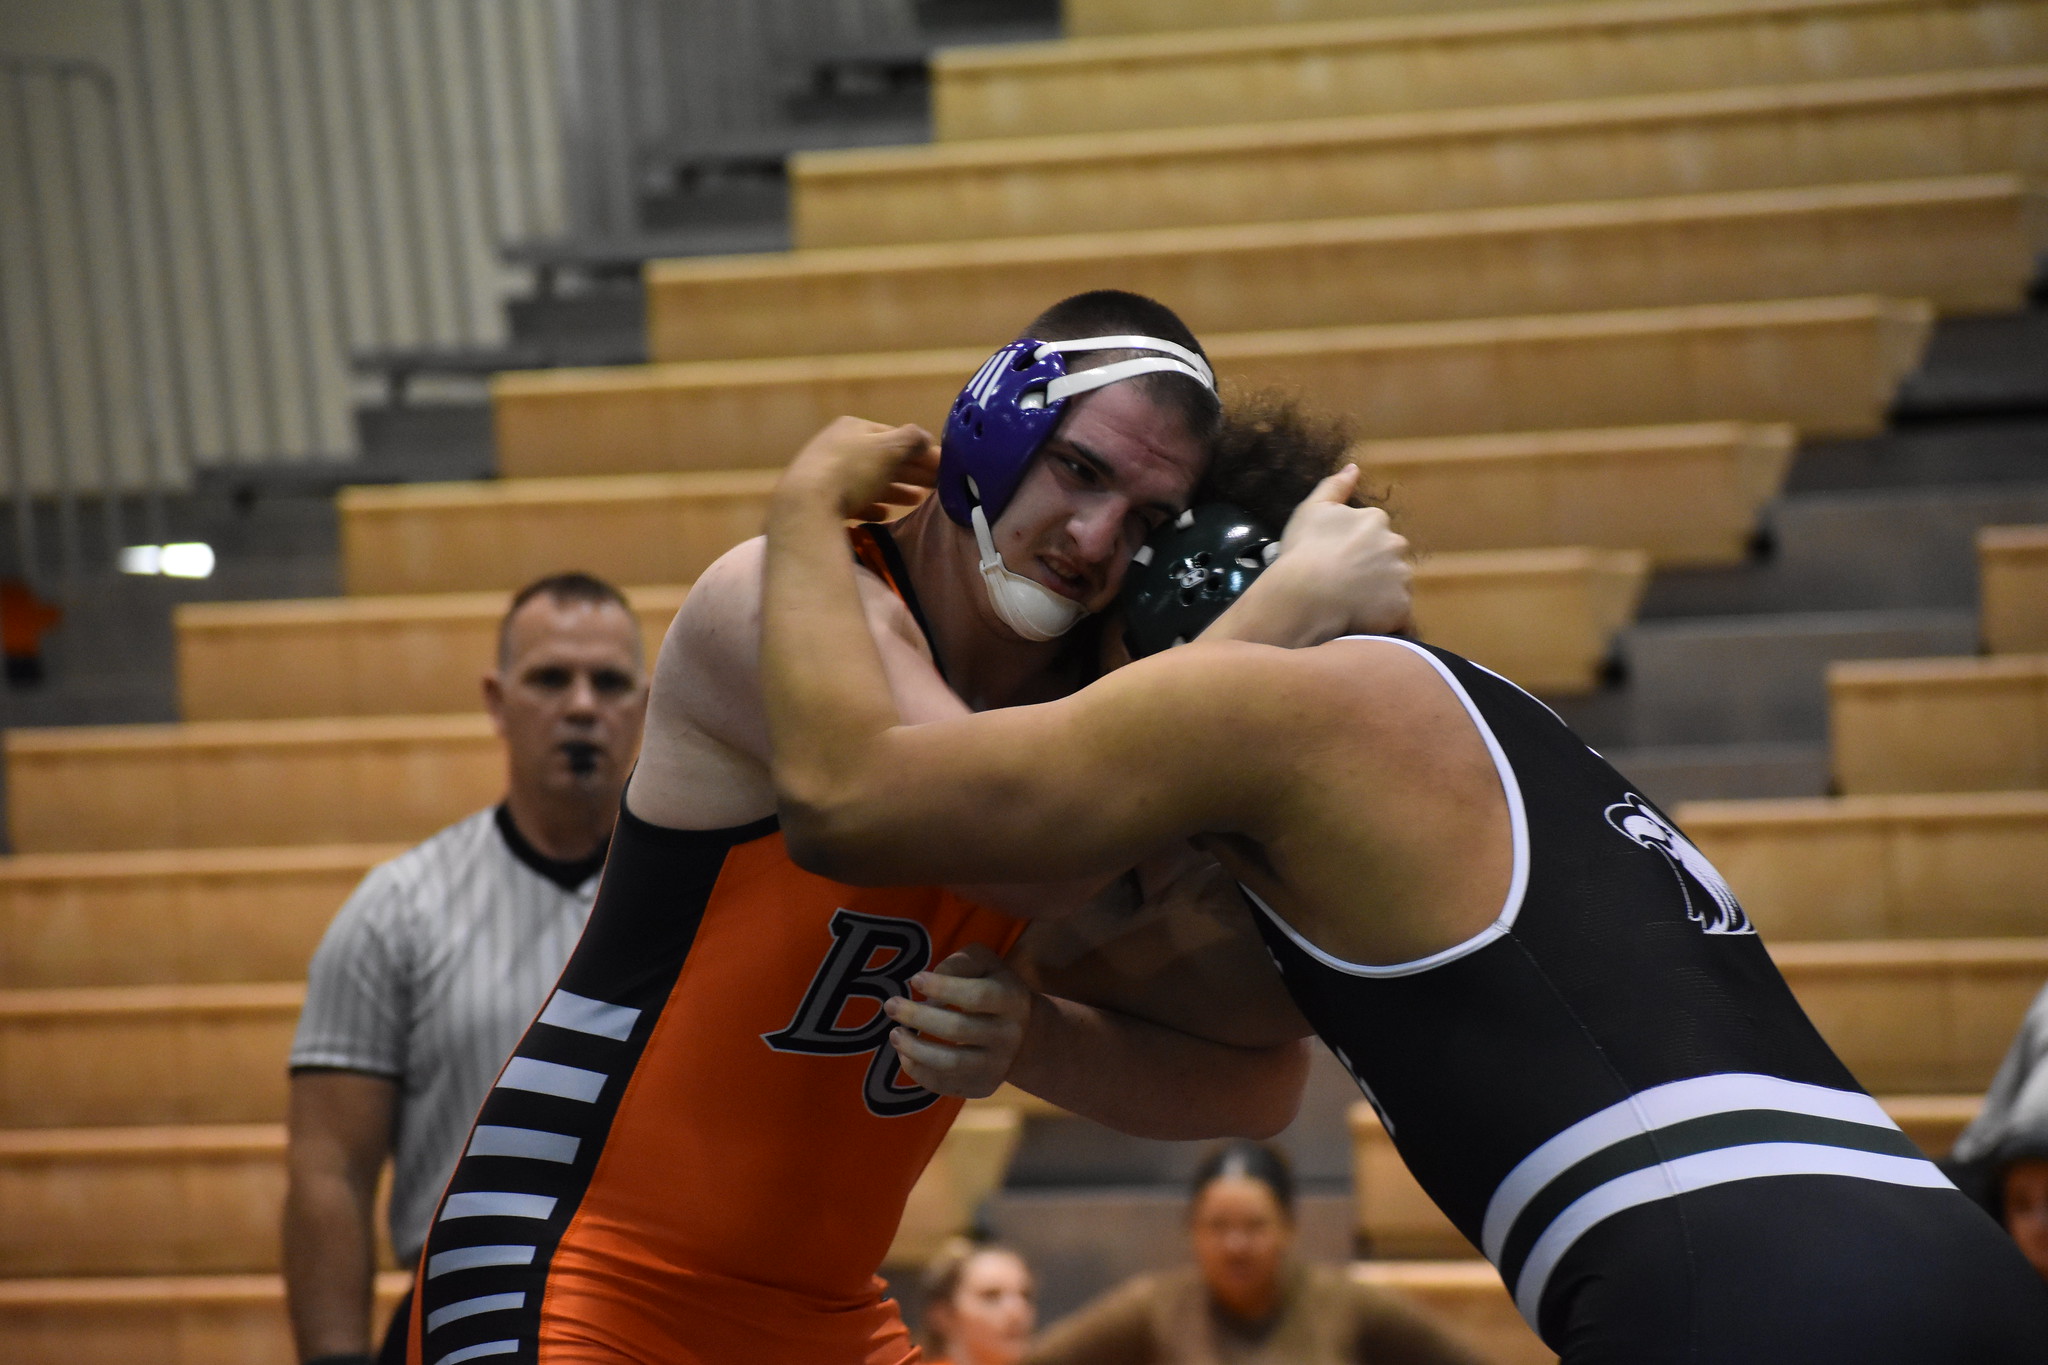 Eslinger's Fall at 285 Pounds Seals Dual Victory Over No. 18 St. Mary, 23-19